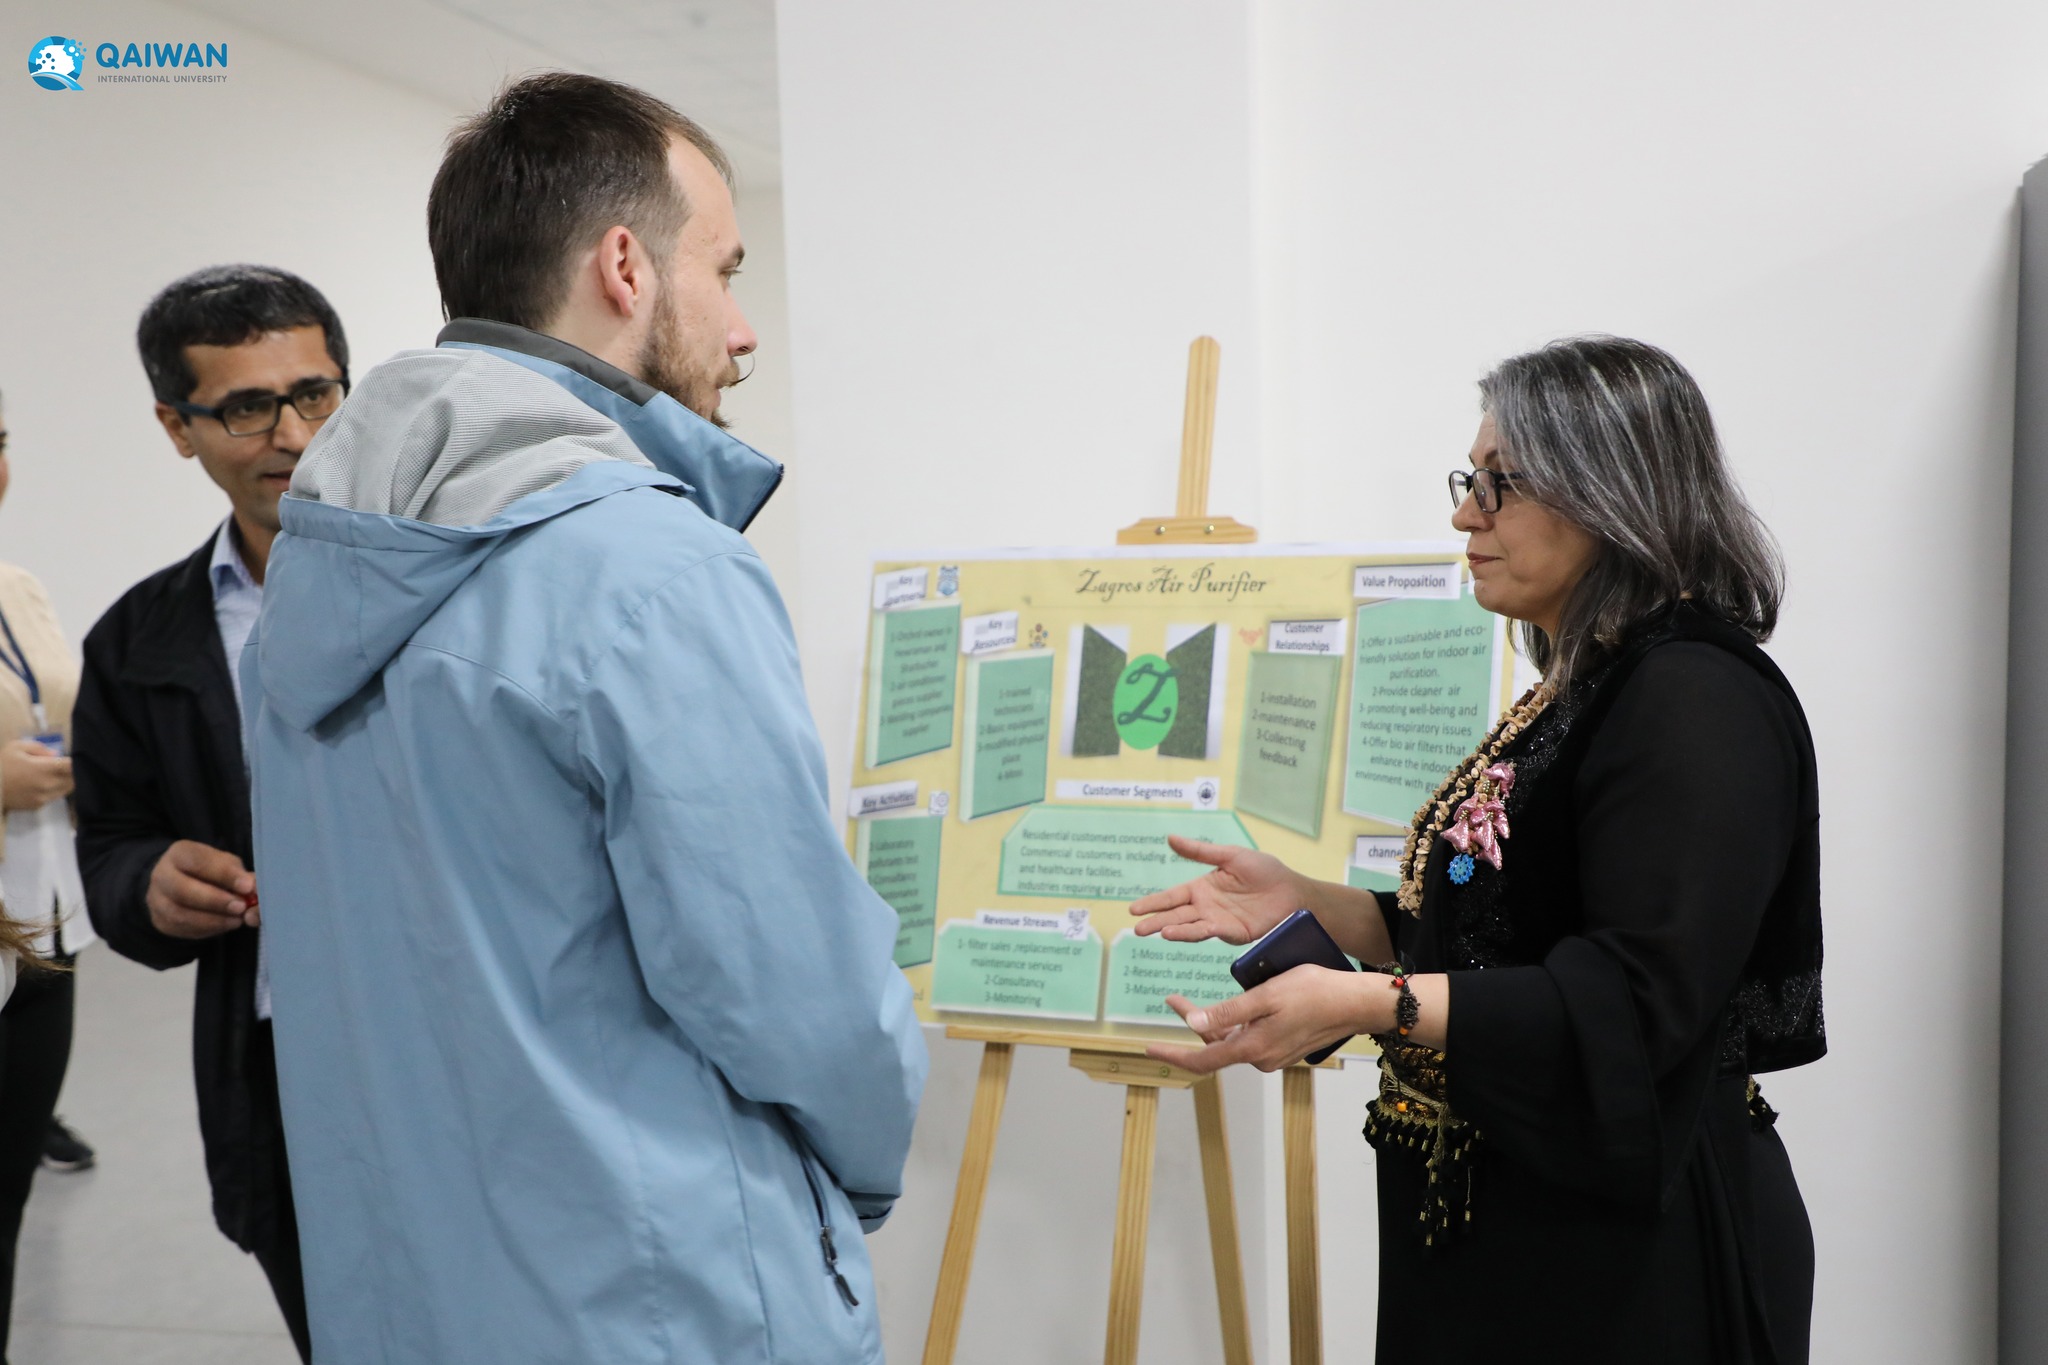 The Pedagogy and Academic Development Center at QIU hosted a poster presentation event for participants